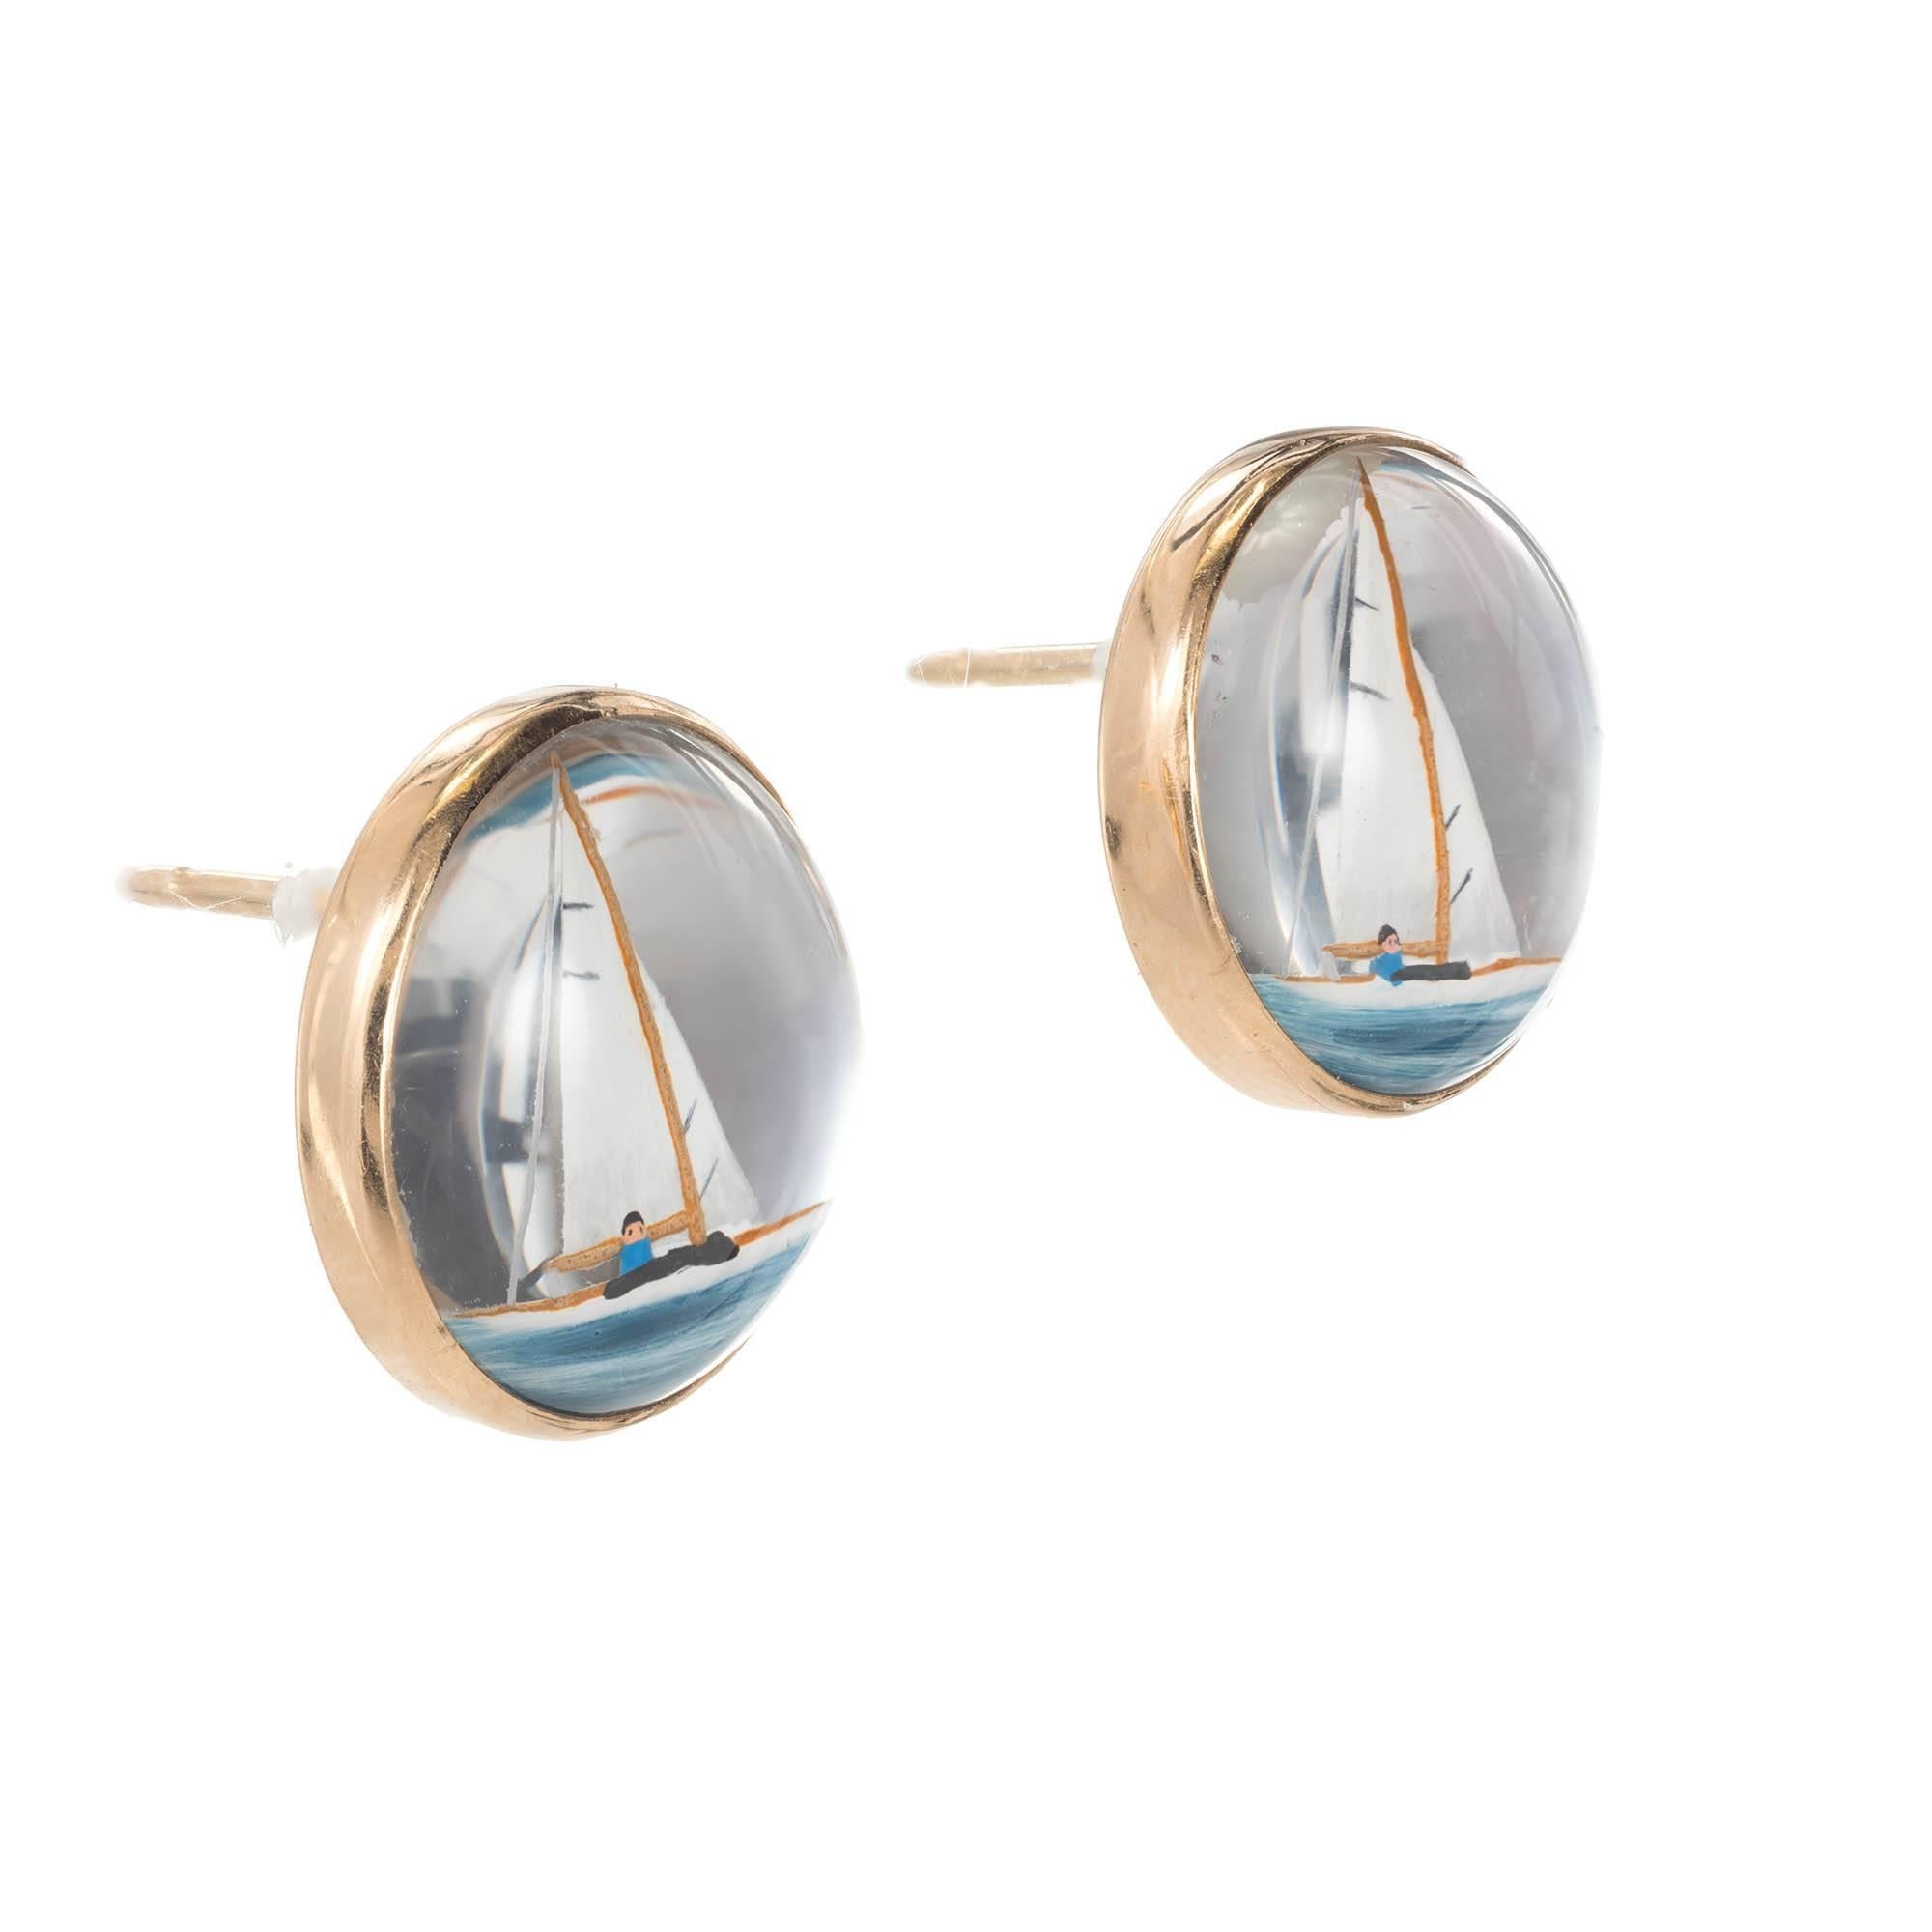 Reverse hand painted Quartz 14k yellow gold earrings. Carvings of a young boy on a sail boat. Pierced style

13mm top quality reverse carved Quartz crystal hand painted sail boats
Pierced posts
14k Yellow Gold
Stamped: 14k engraved MEM
5.6